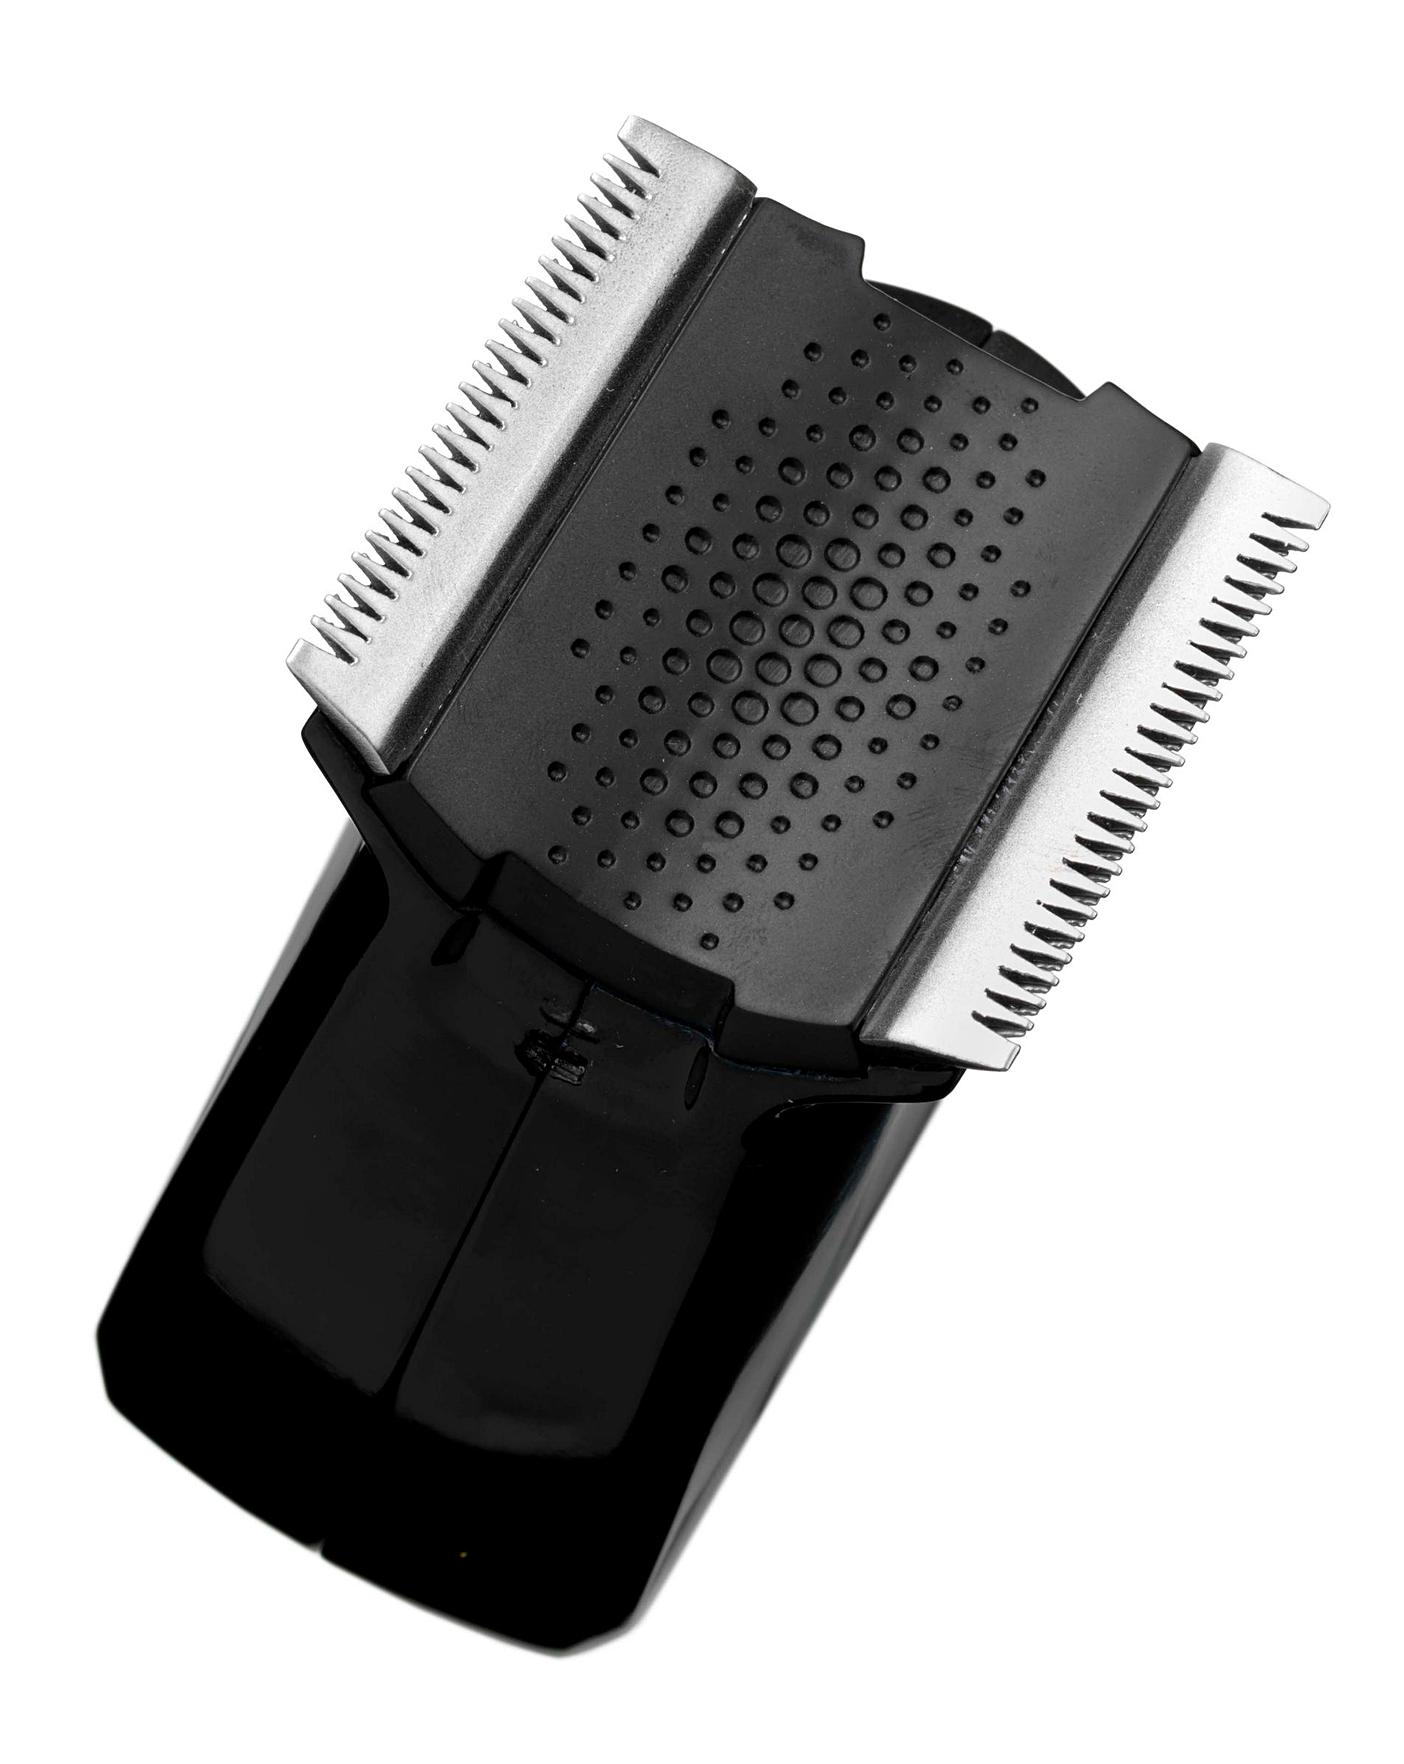 babyliss self clipping